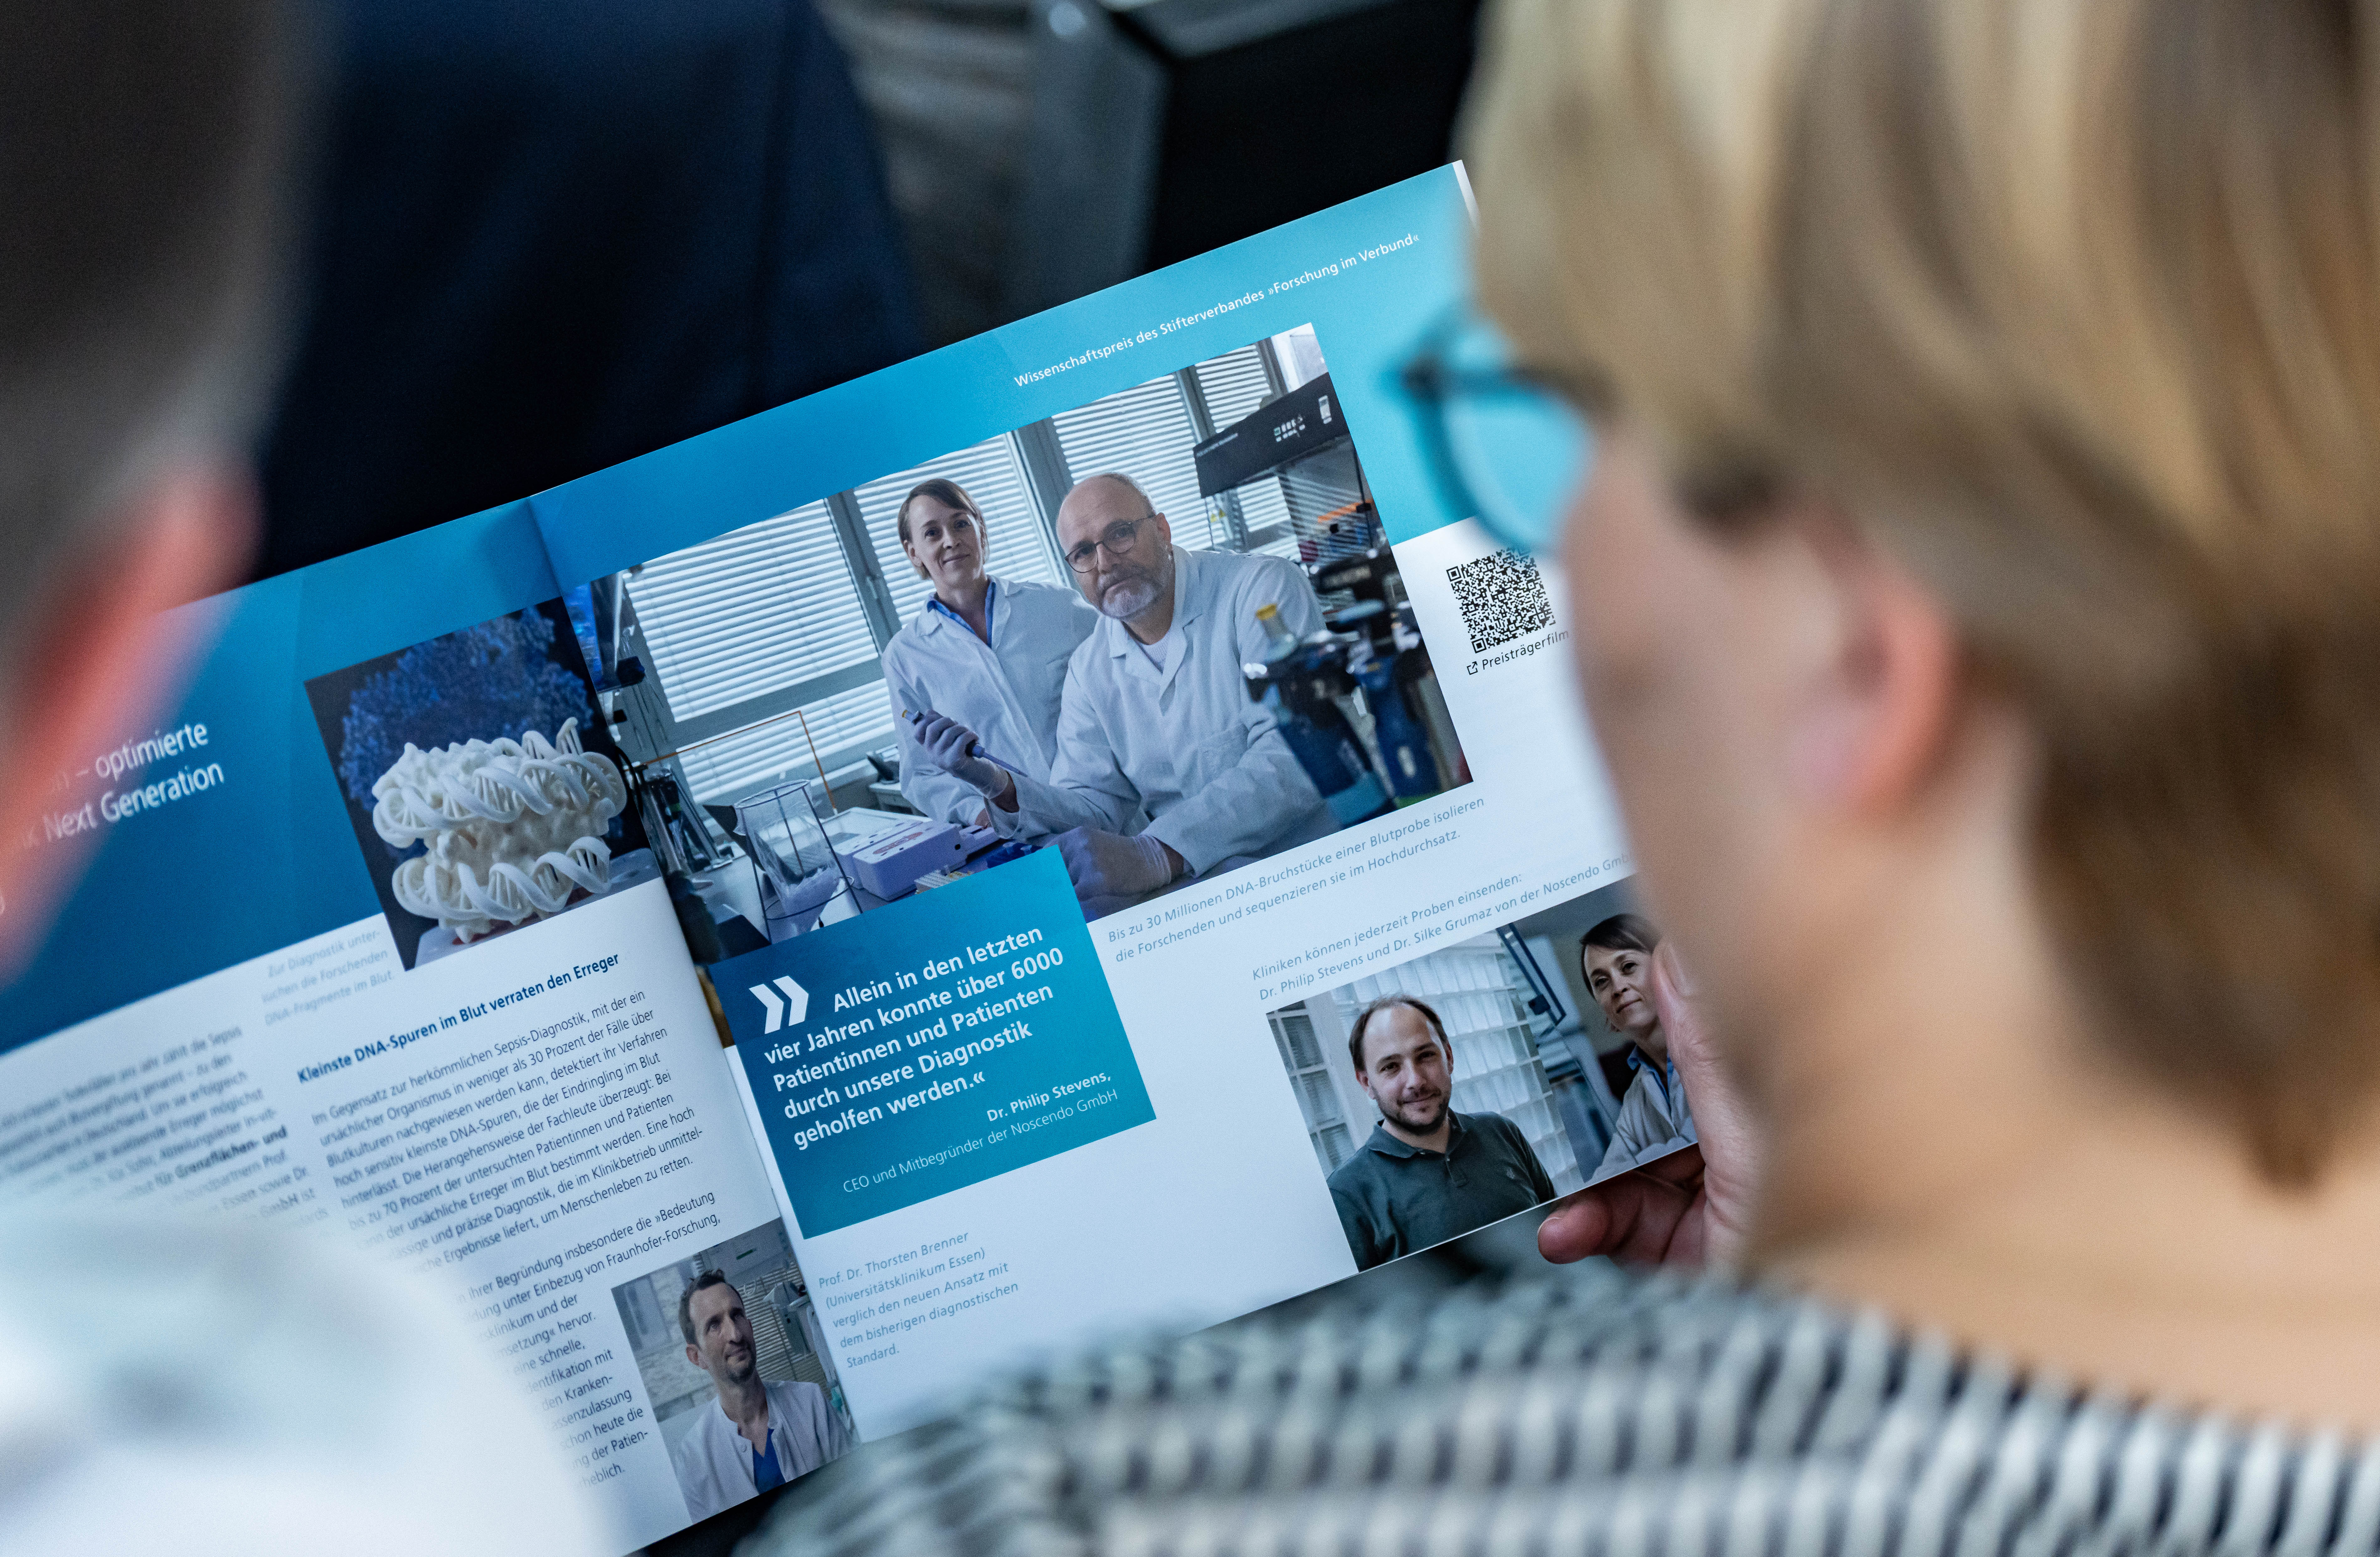 The winners and their projects are presented in the brochure accompanying the Fraunhofer Annual Assembly.